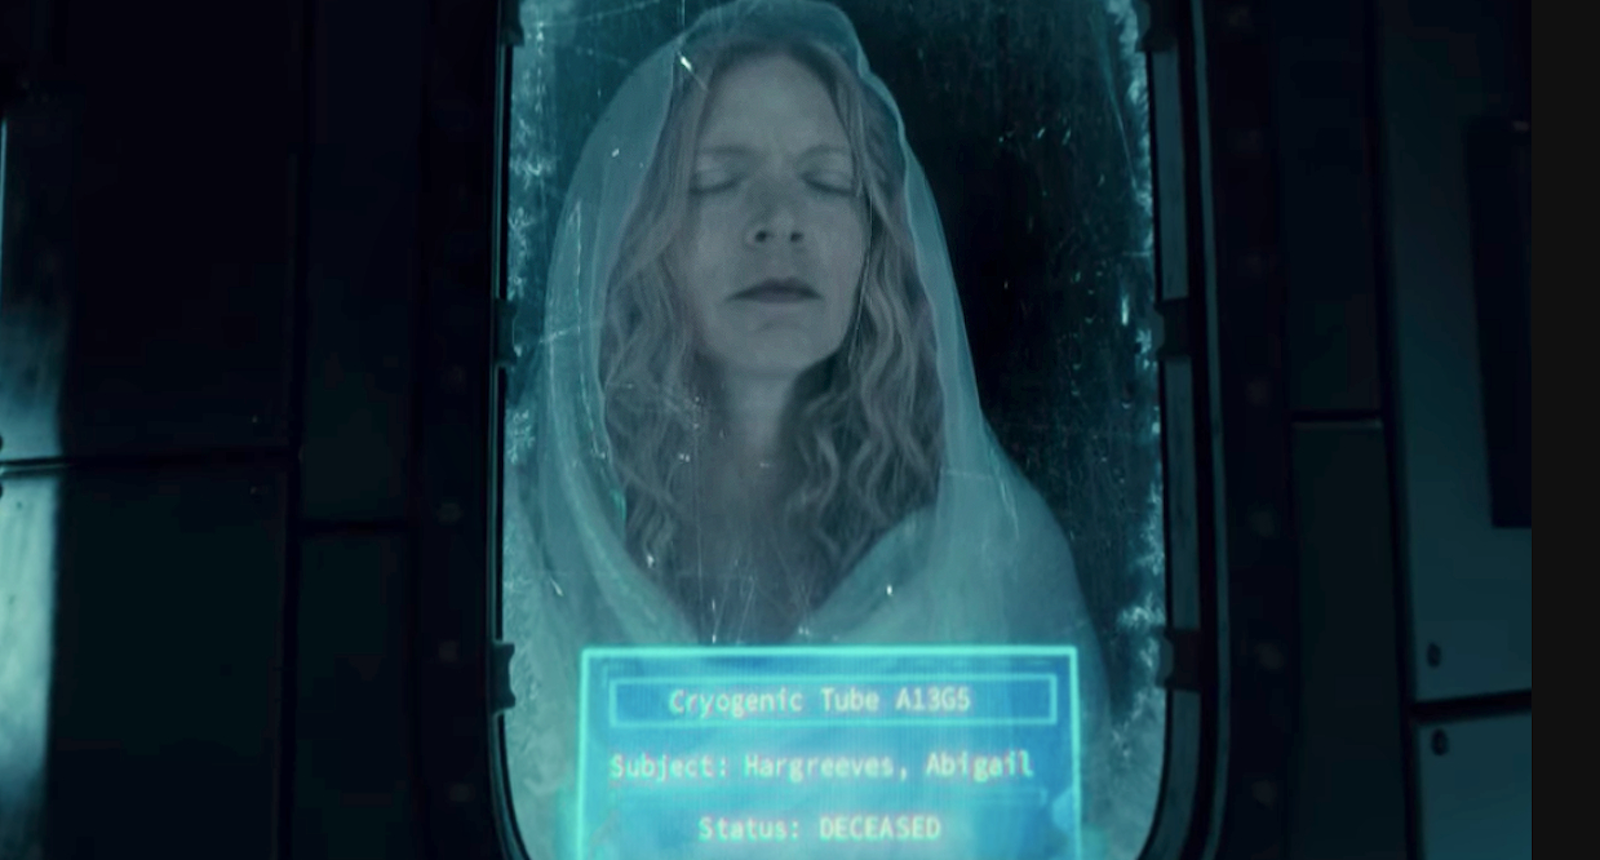 Abigail Hargreeves (Liisa Repo-Martell) in her cryogenic moon chamber